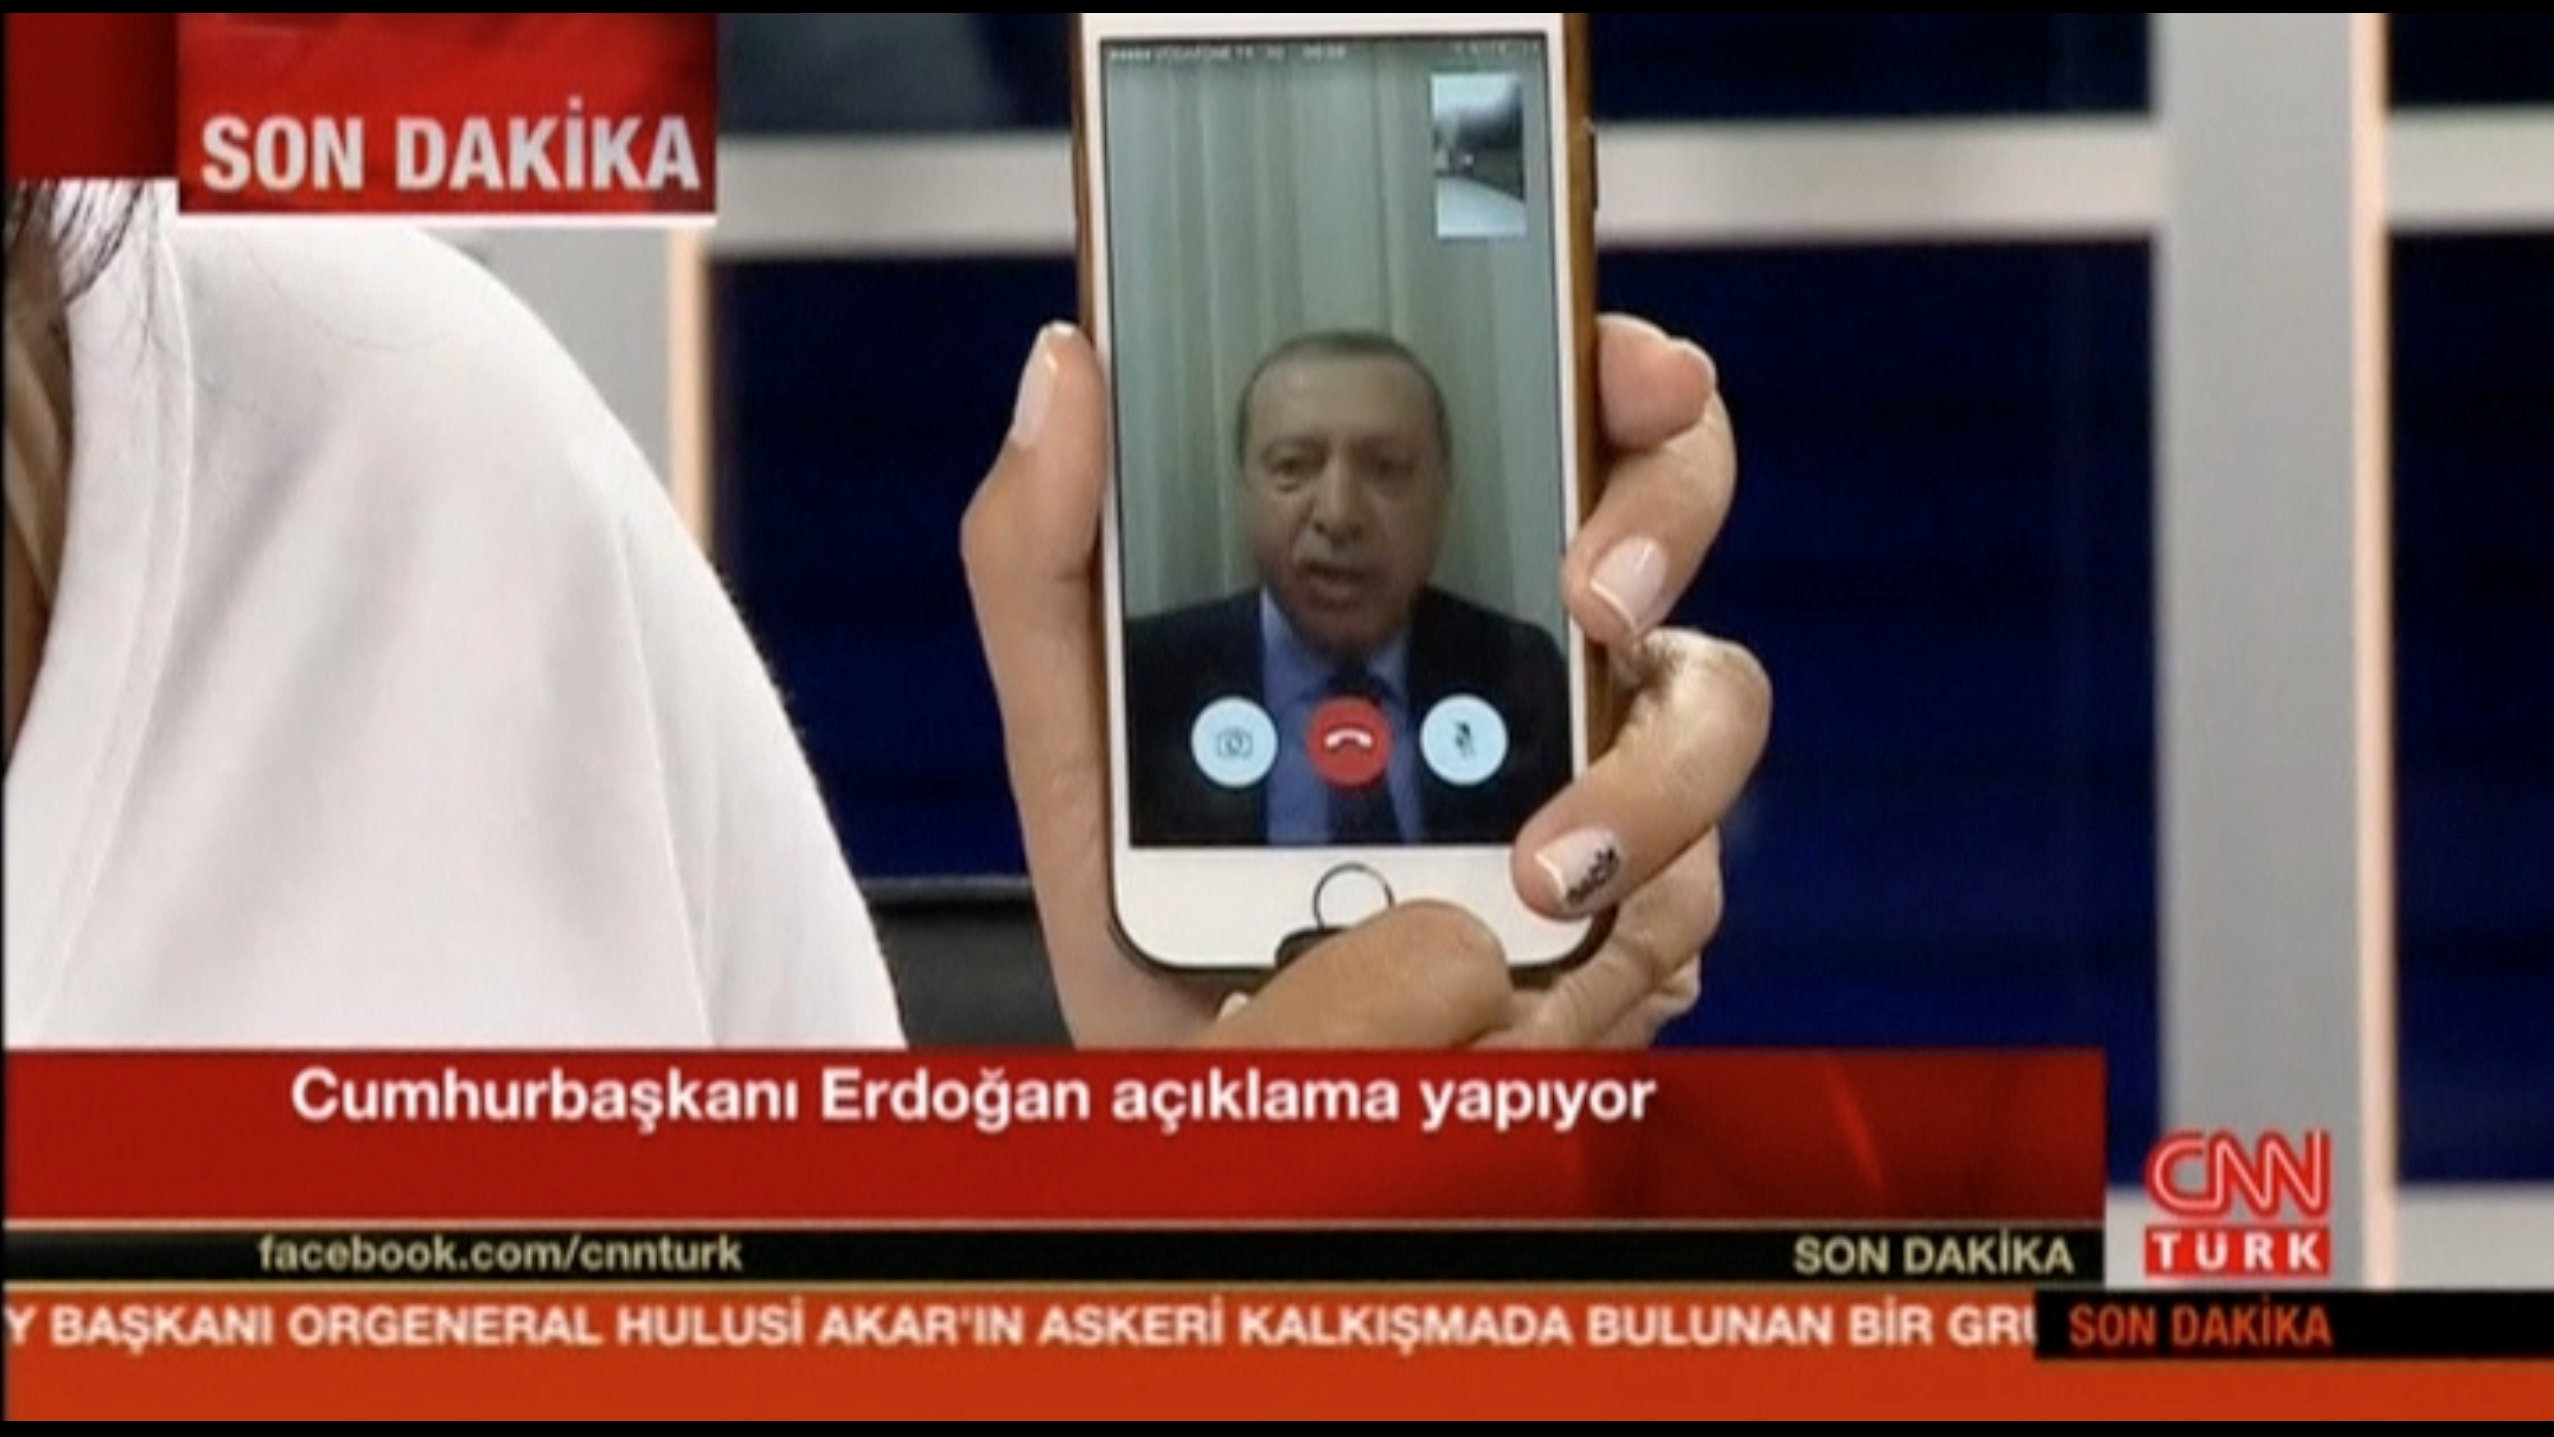 Still frame taken from video shows Turkey's President Tayyip Erdogan speaking via a Facetime video connection to address the nation during an attempted coup, in Marmais